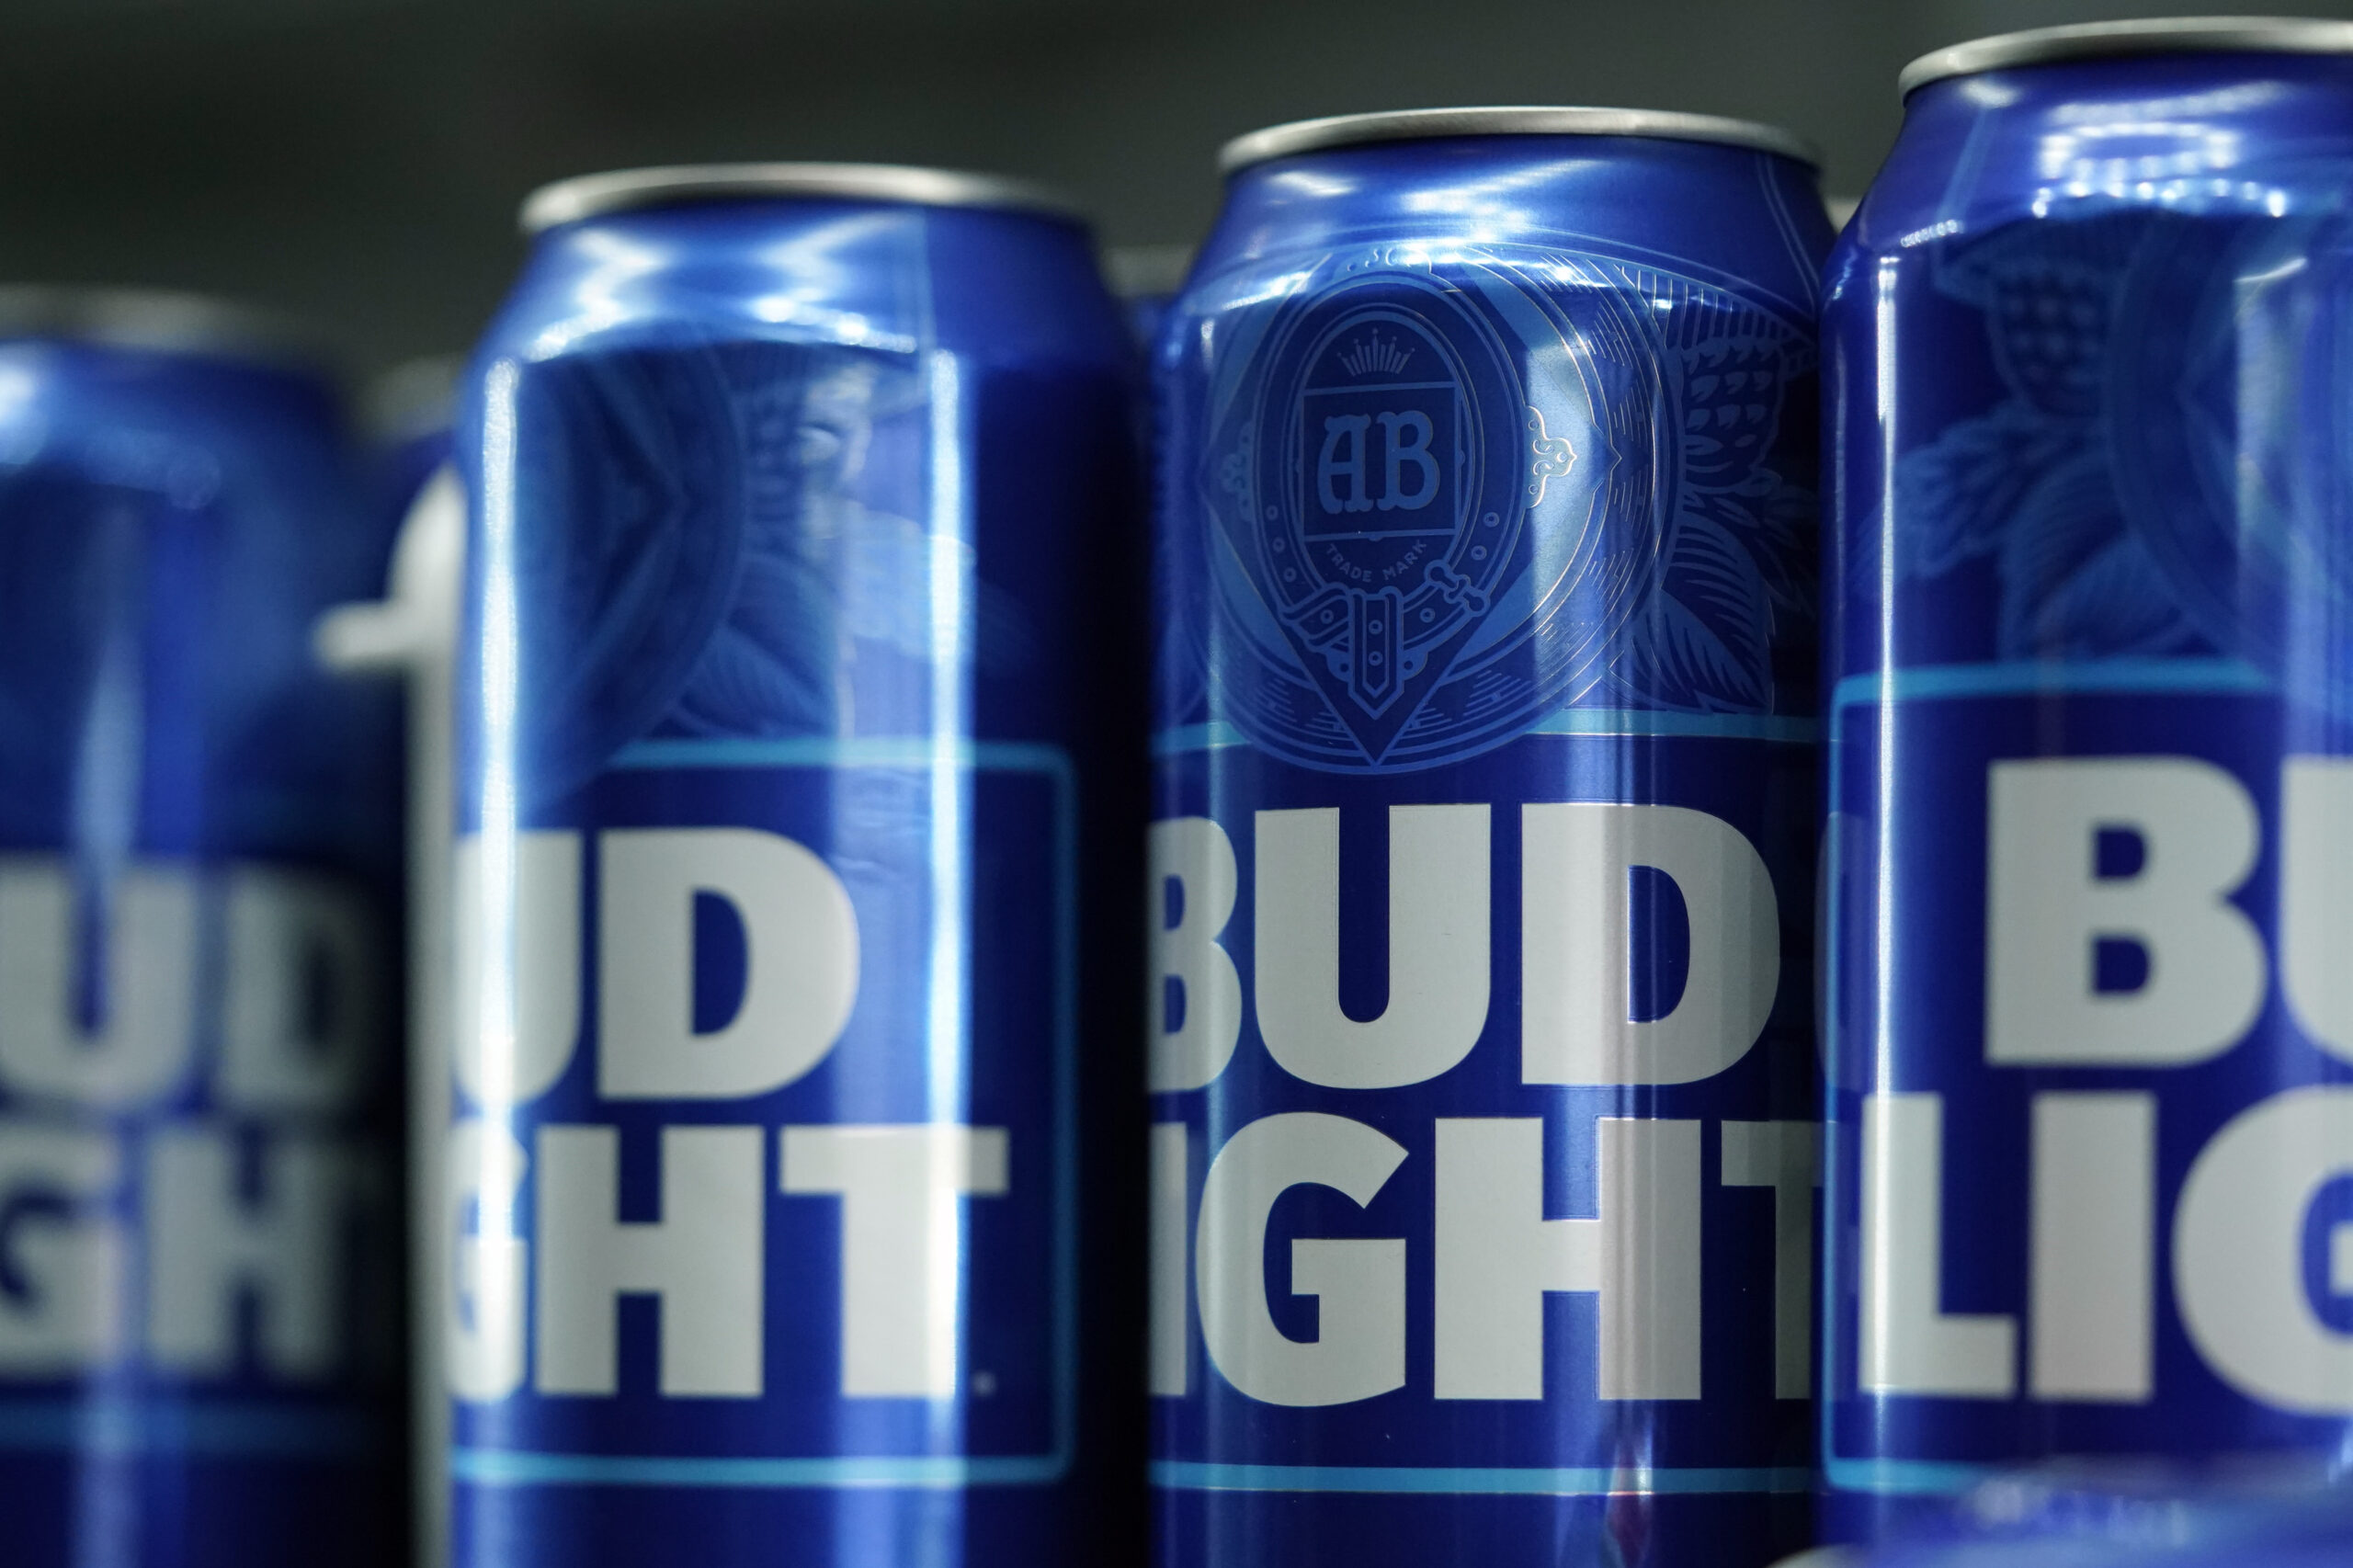 Iowa Republican Dinner Features Chance For Guests To Take Out Anger on Bud Light